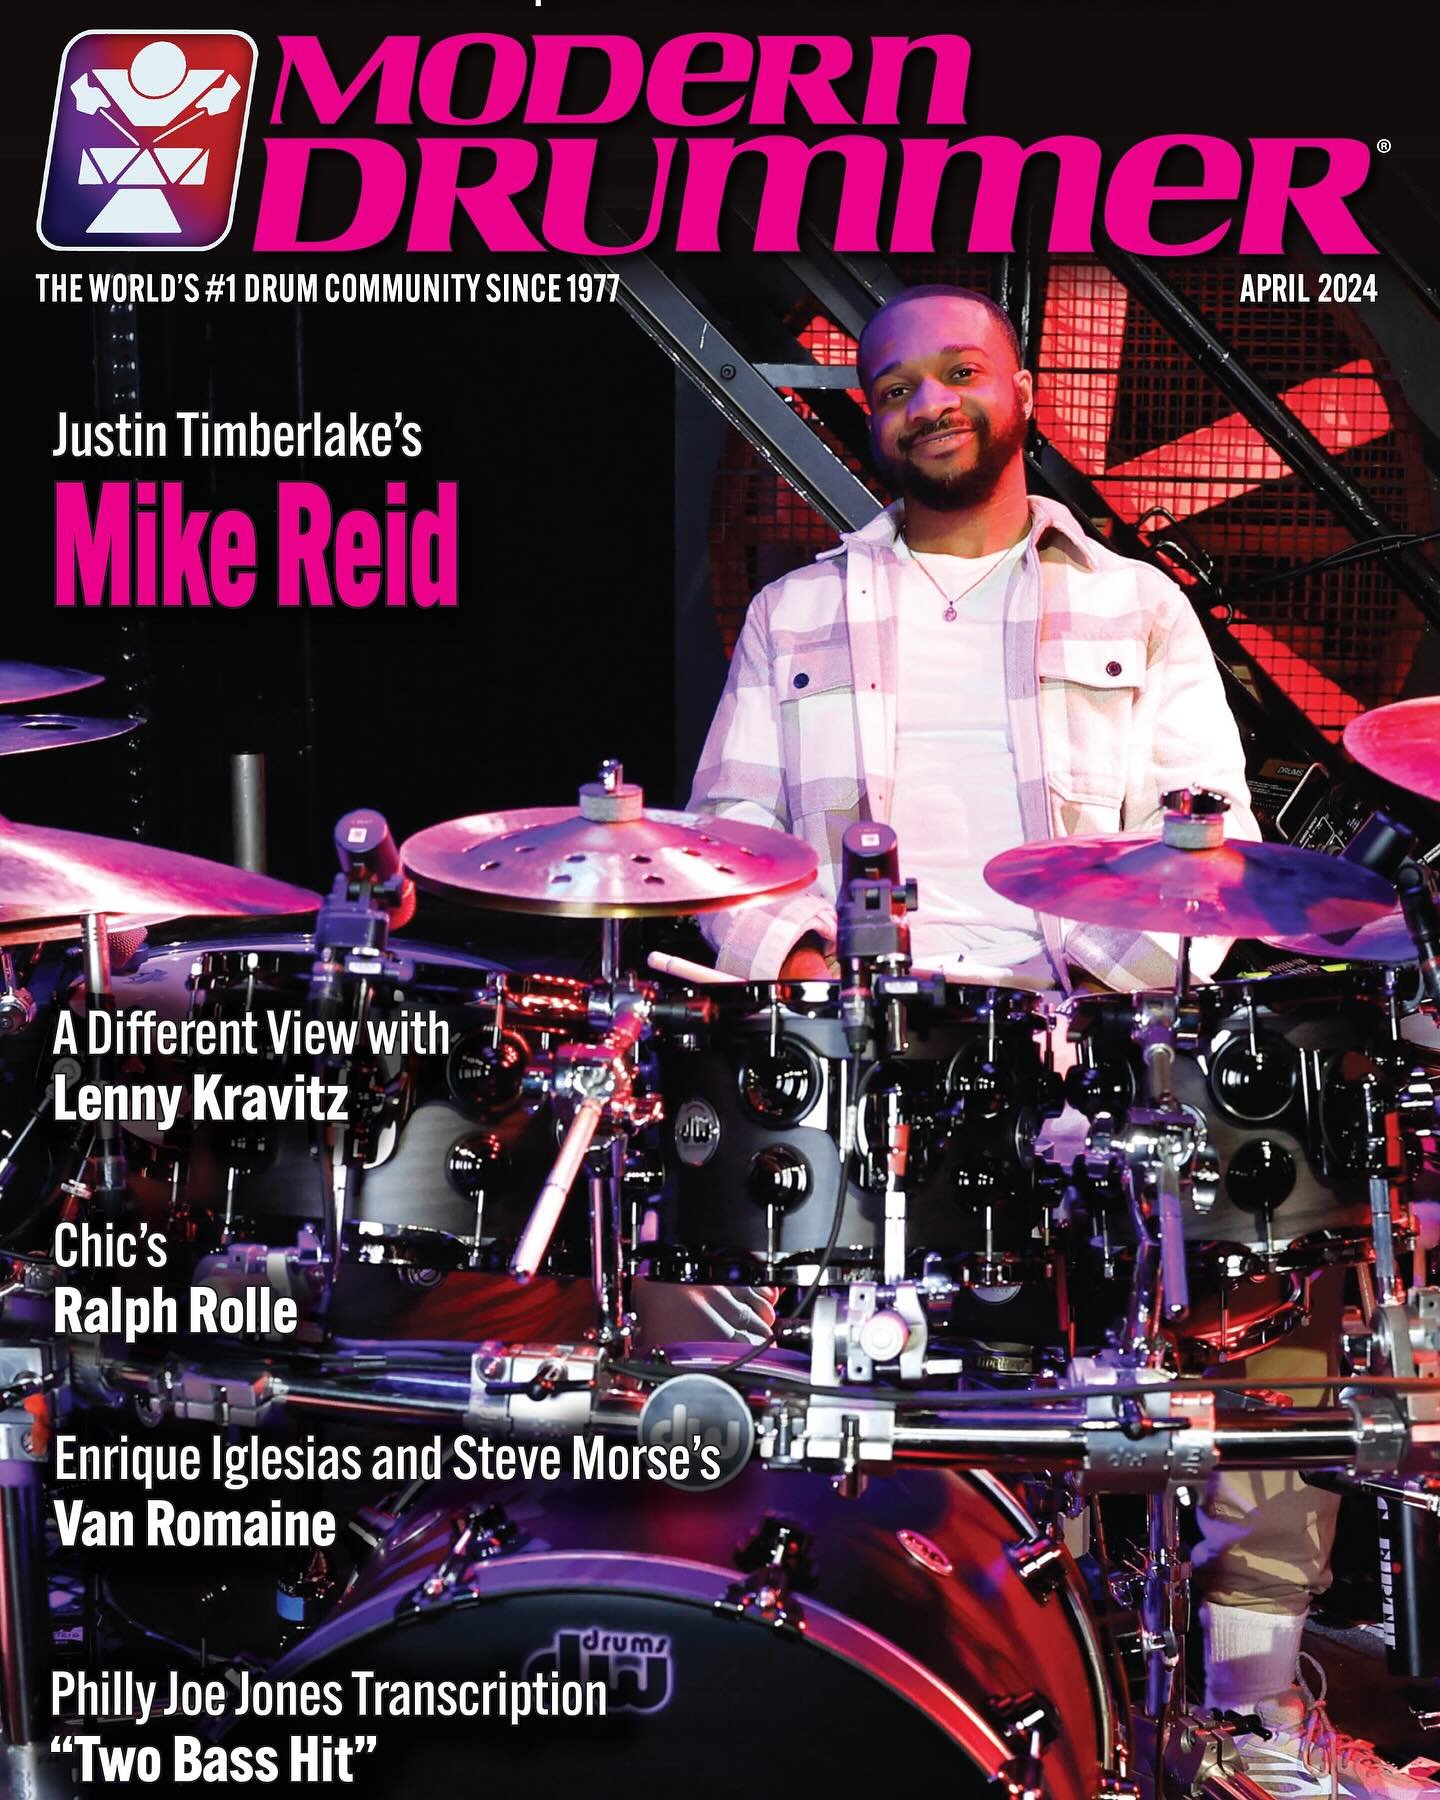 Our album &ldquo;Familia&rdquo; got featured in the latest issue of Modern Drummer Magazine! 🥁 !!!
Being a fan of the magazine since I first picked up drumsticks, it&rsquo;s beyond words to see our work recognized in these pages. From collecting iss